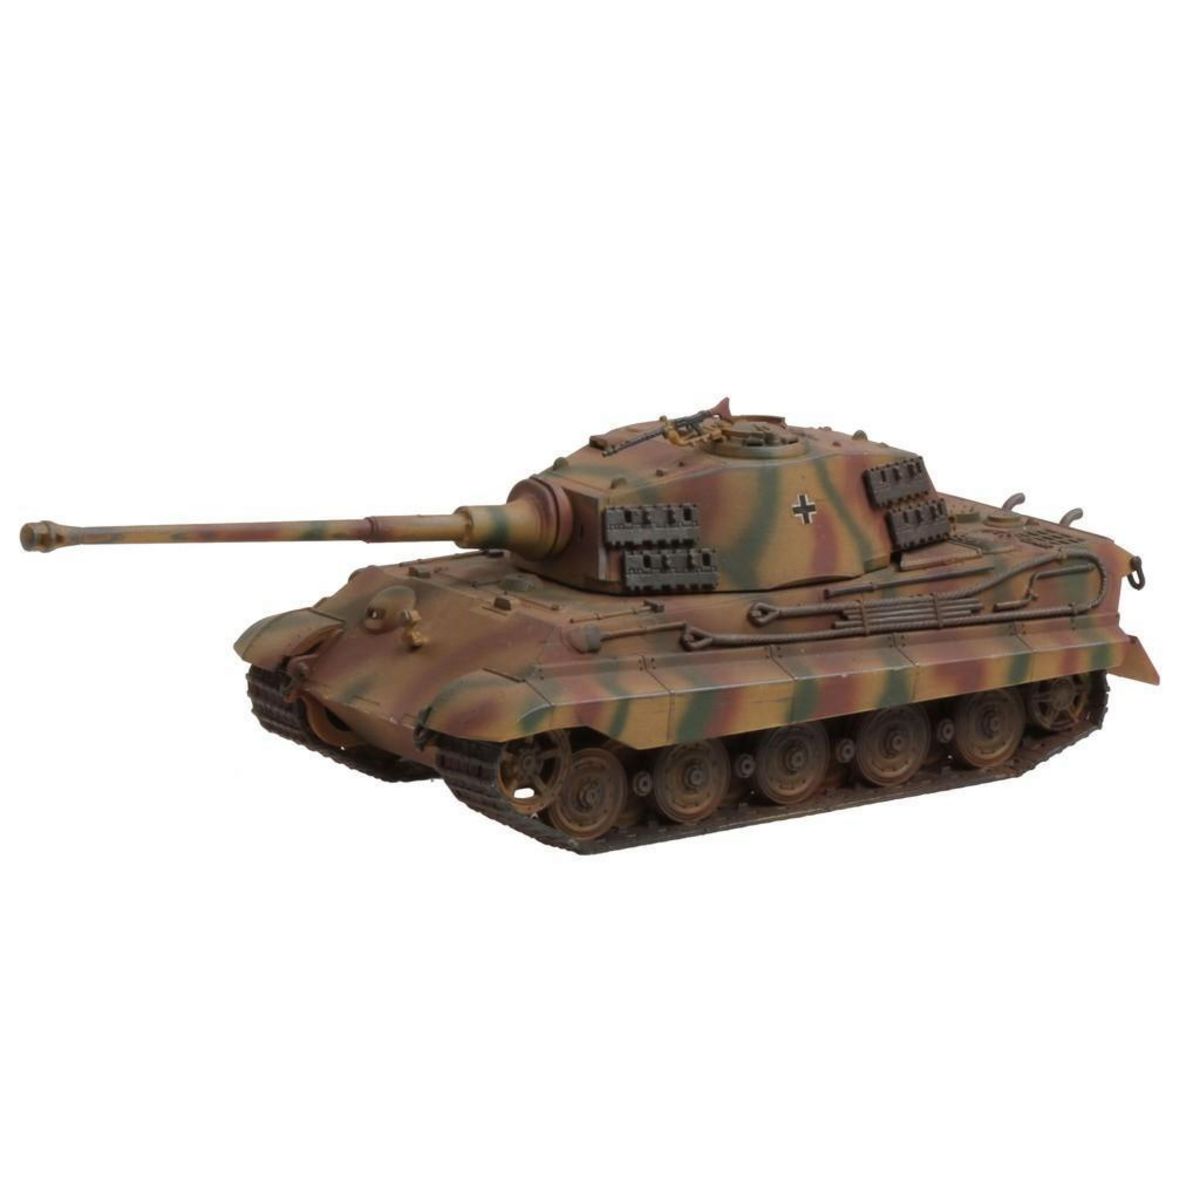 Revell Maquette Char : Tiger II Ausf. B